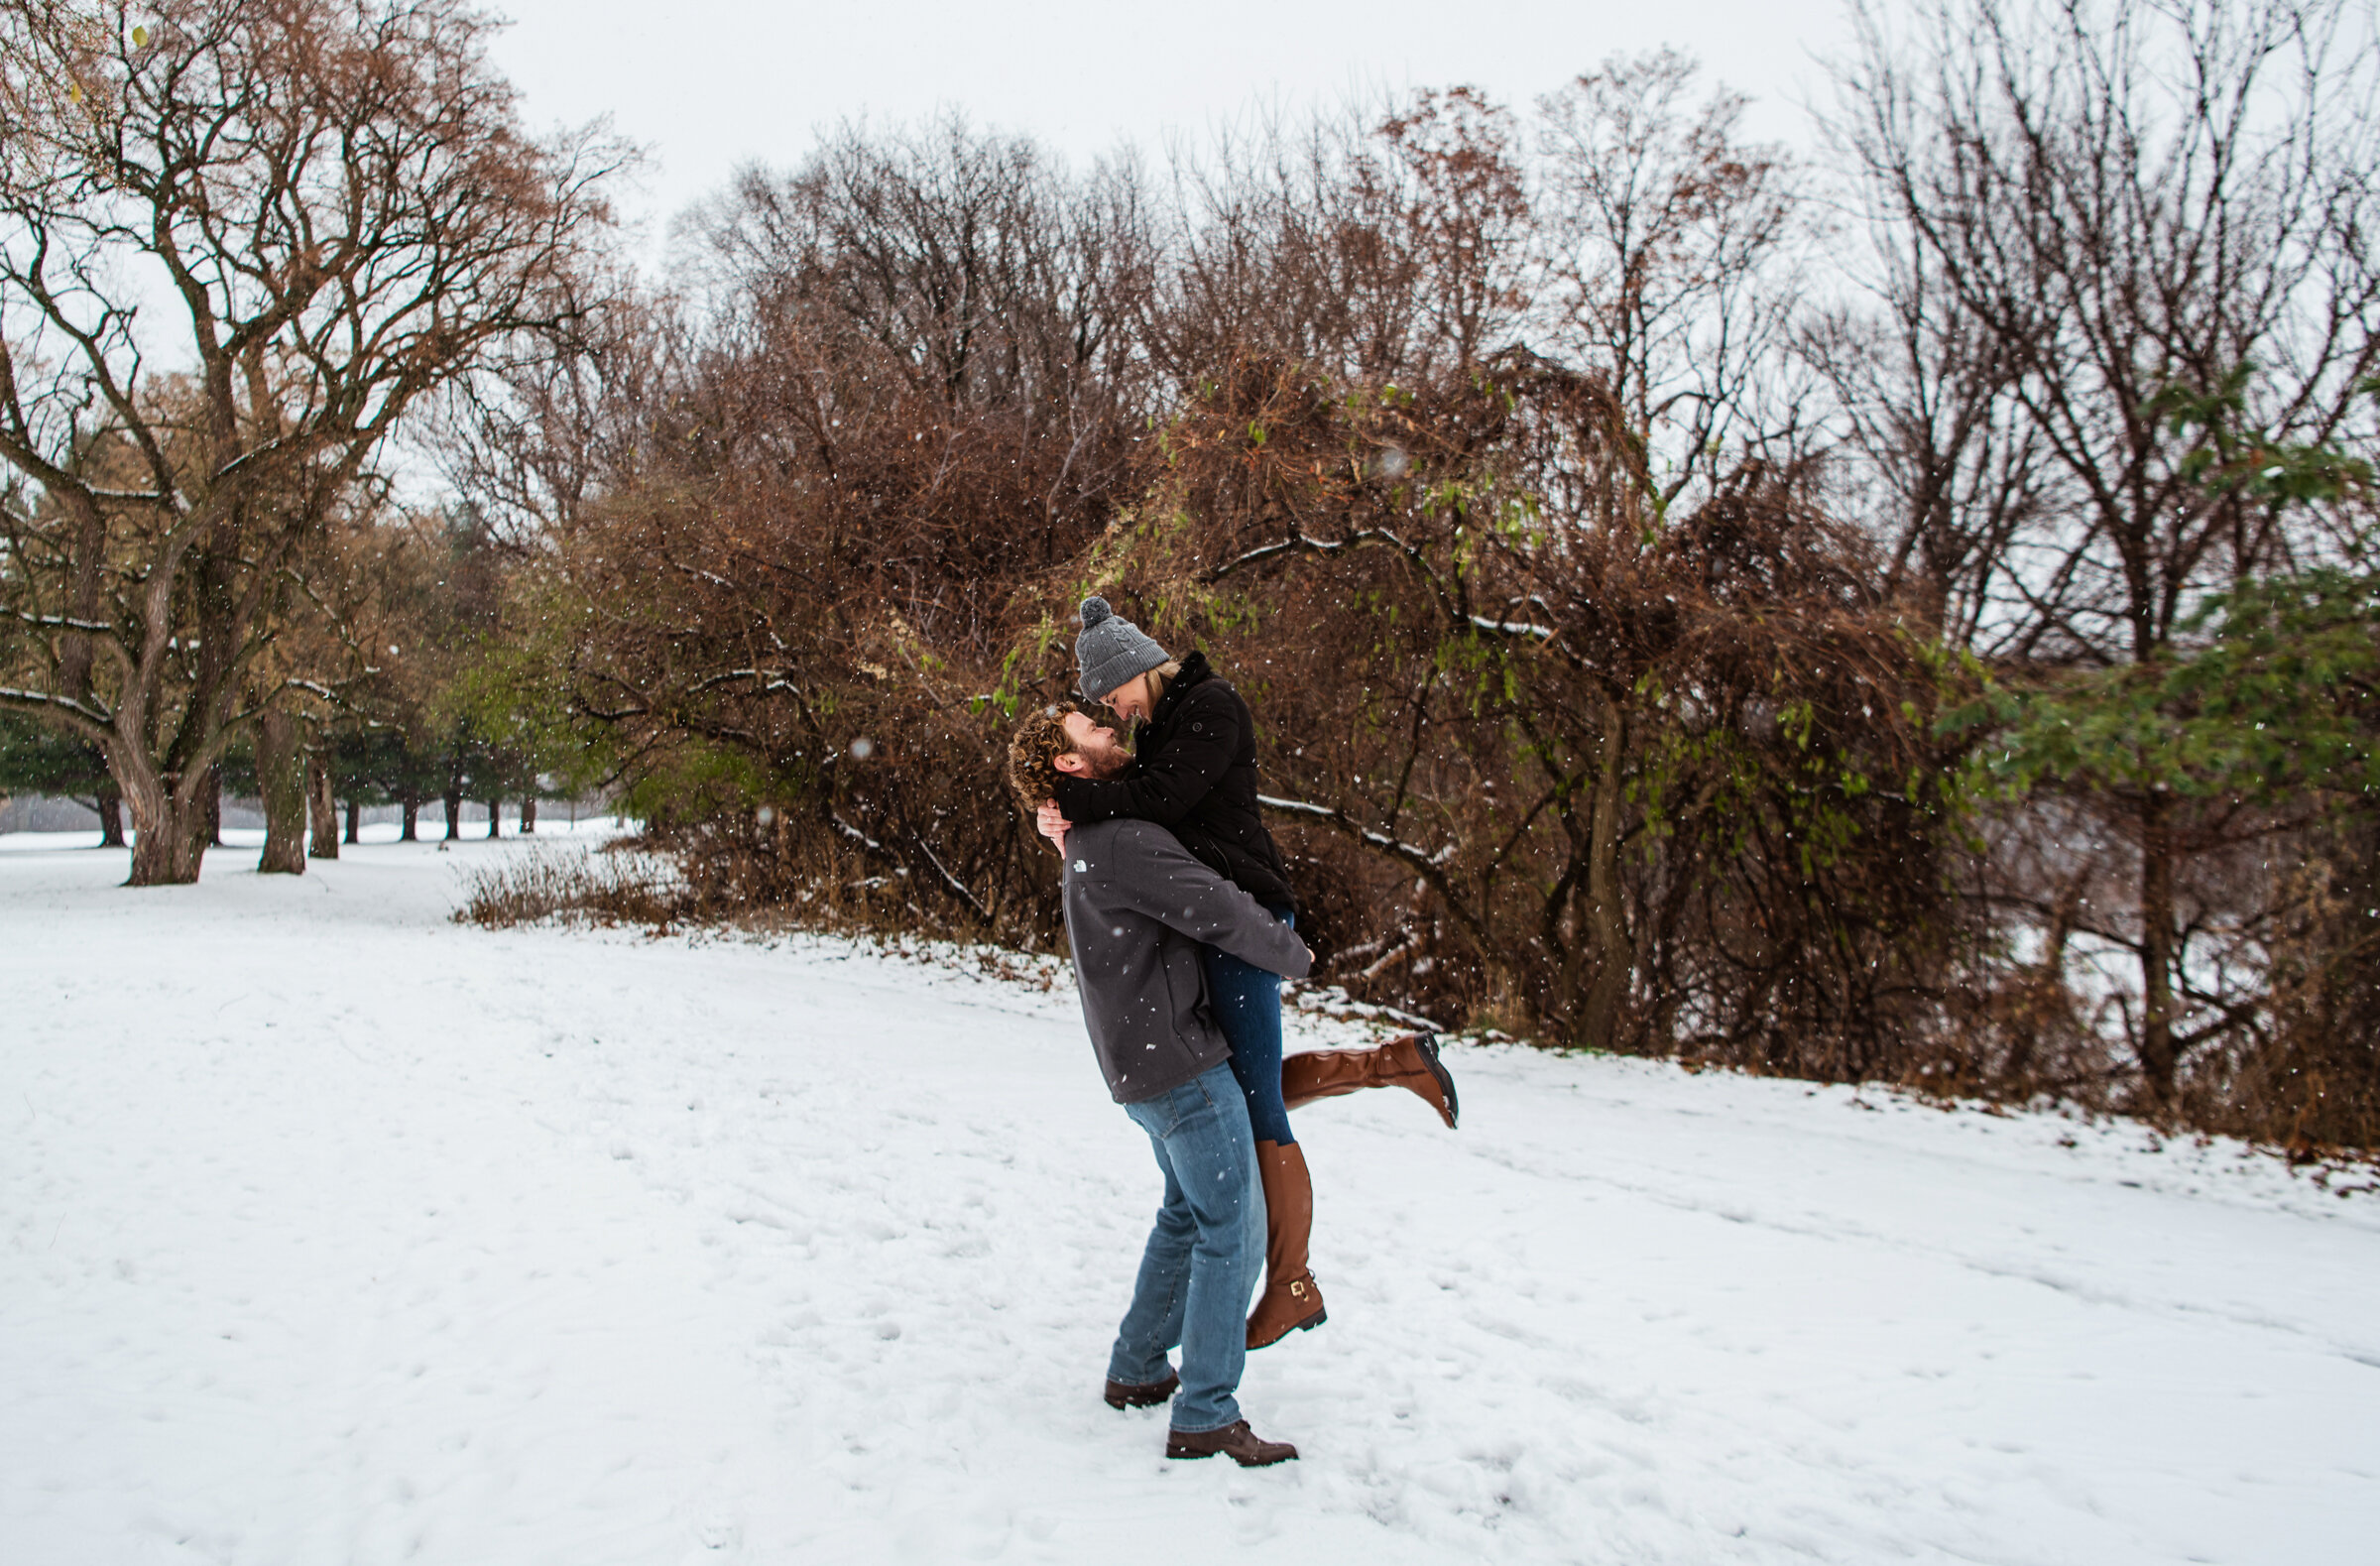 Irondequoit_Beer_Company_Durand_Eastman_Park_Rochester_Engagement_Session_JILL_STUDIO_Rochester_NY_Photographer_7206.jpg